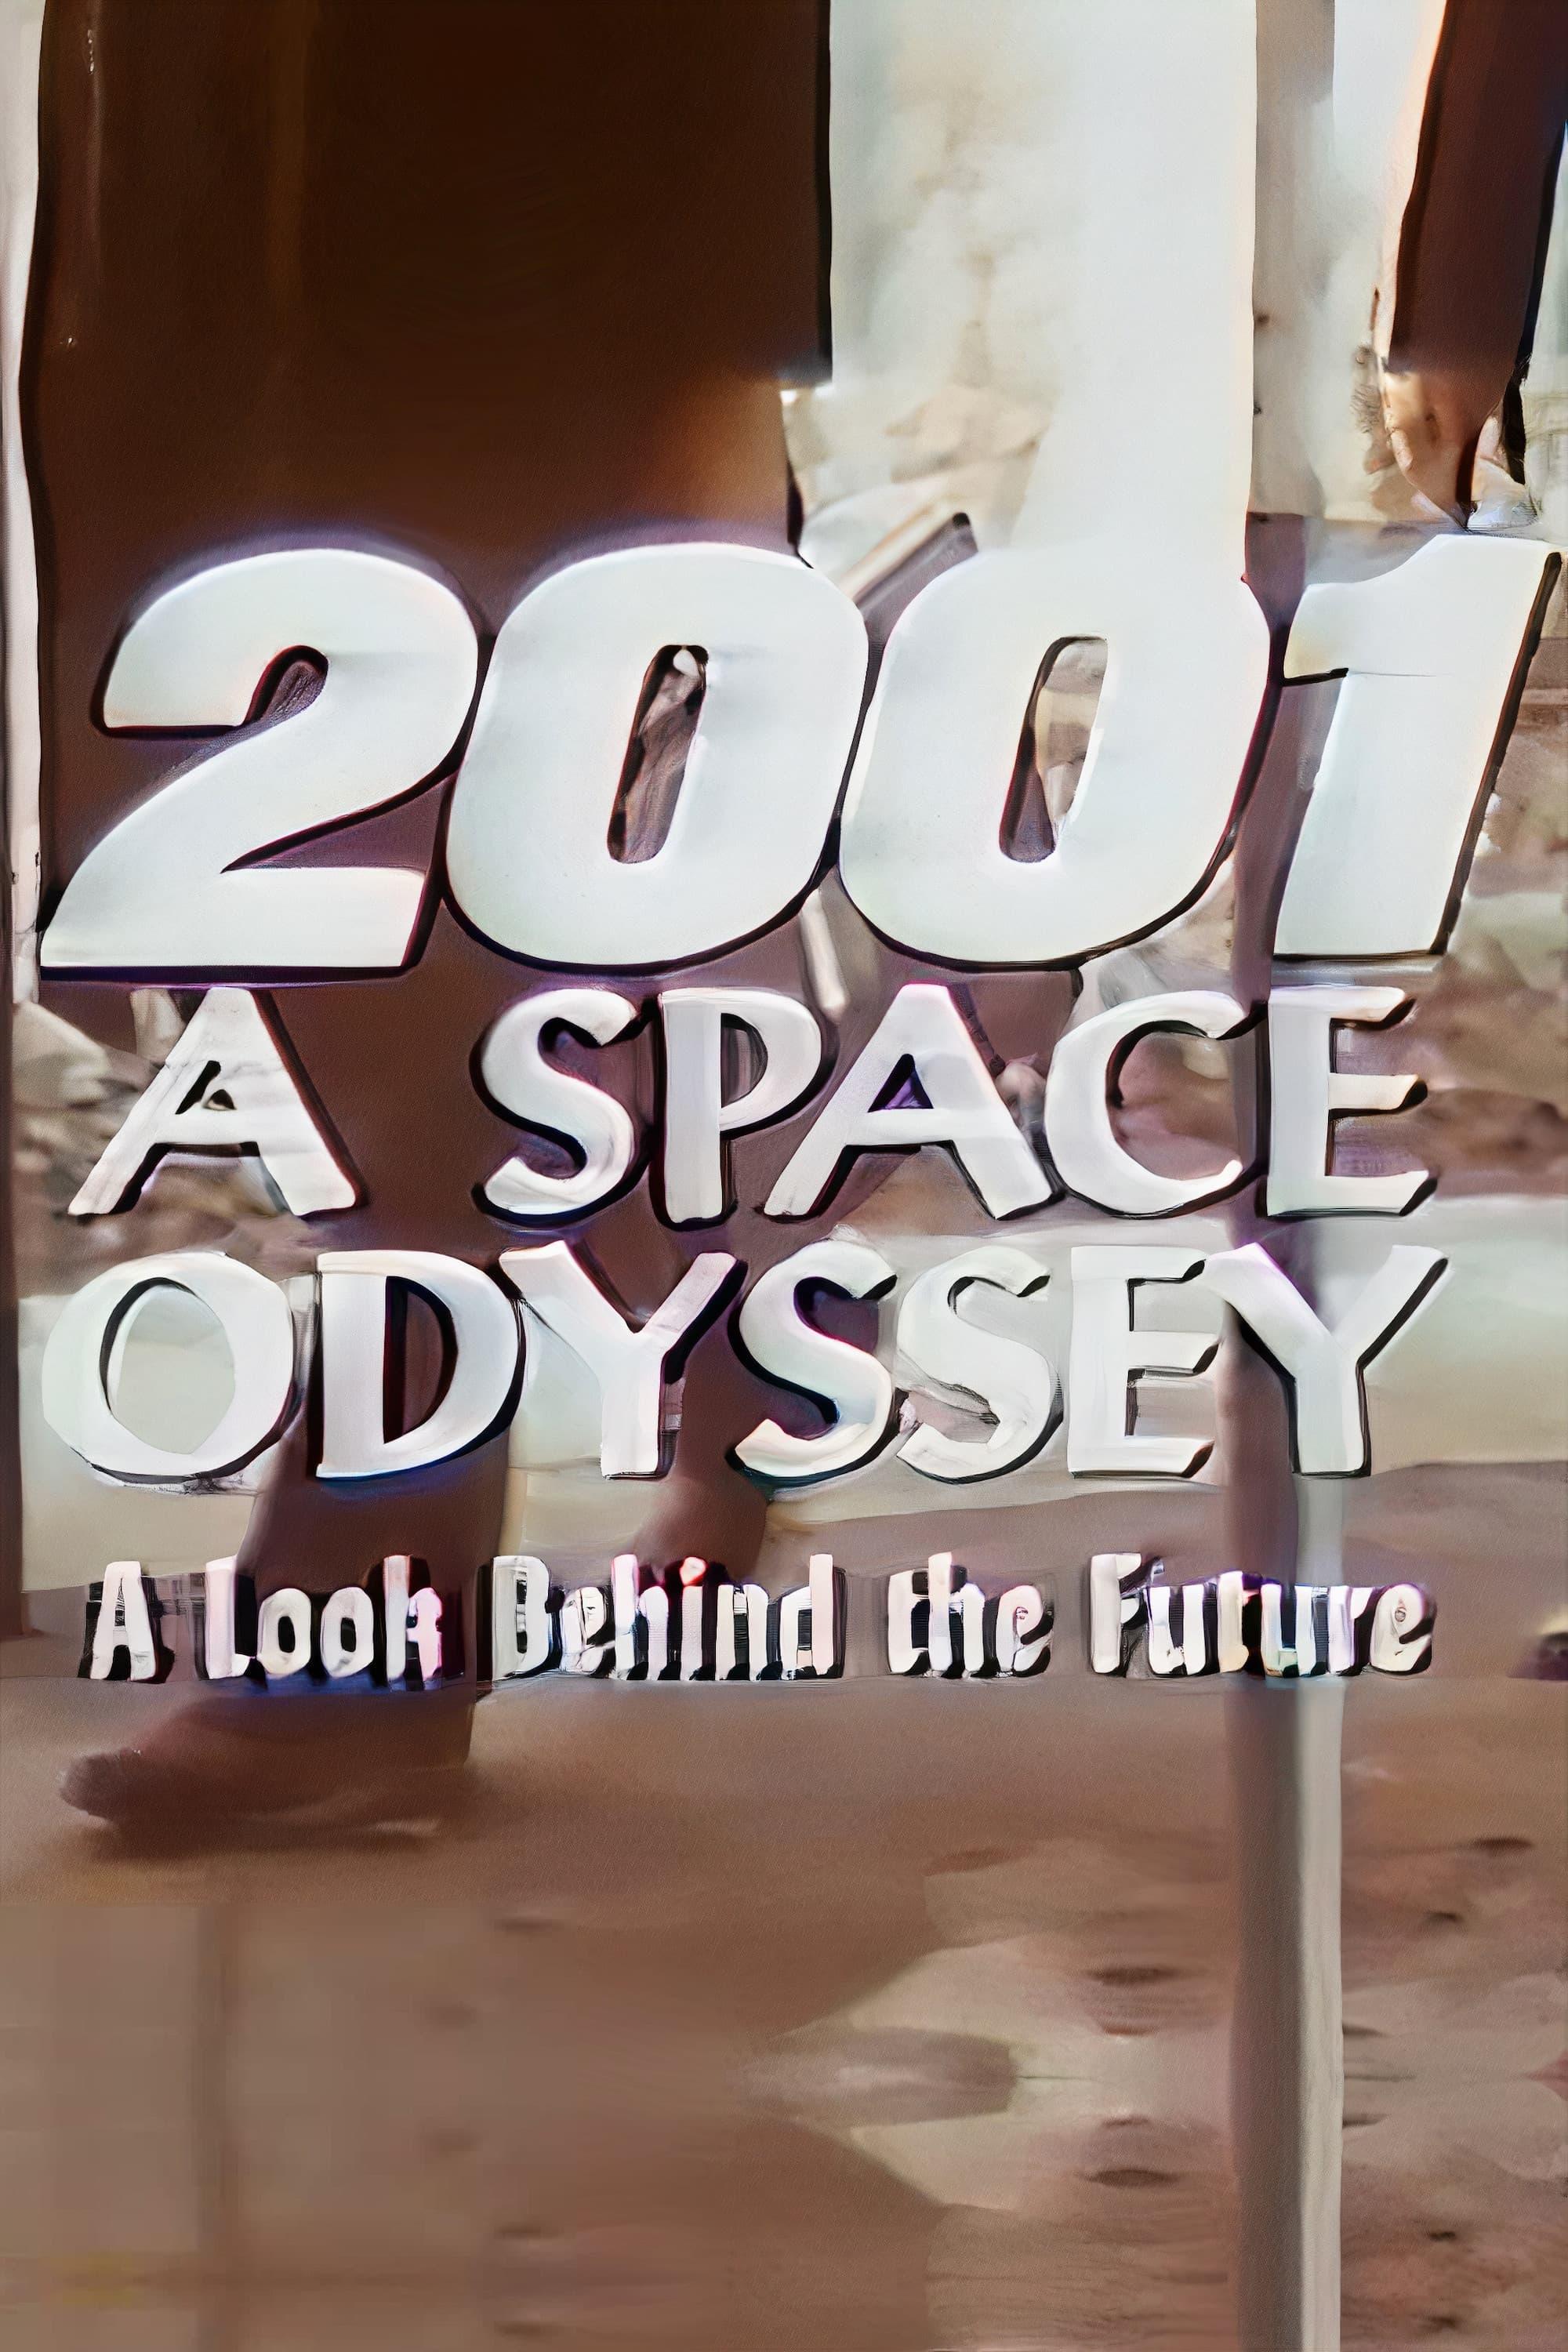 '2001: A Space Odyssey' – A Look Behind the Future poster